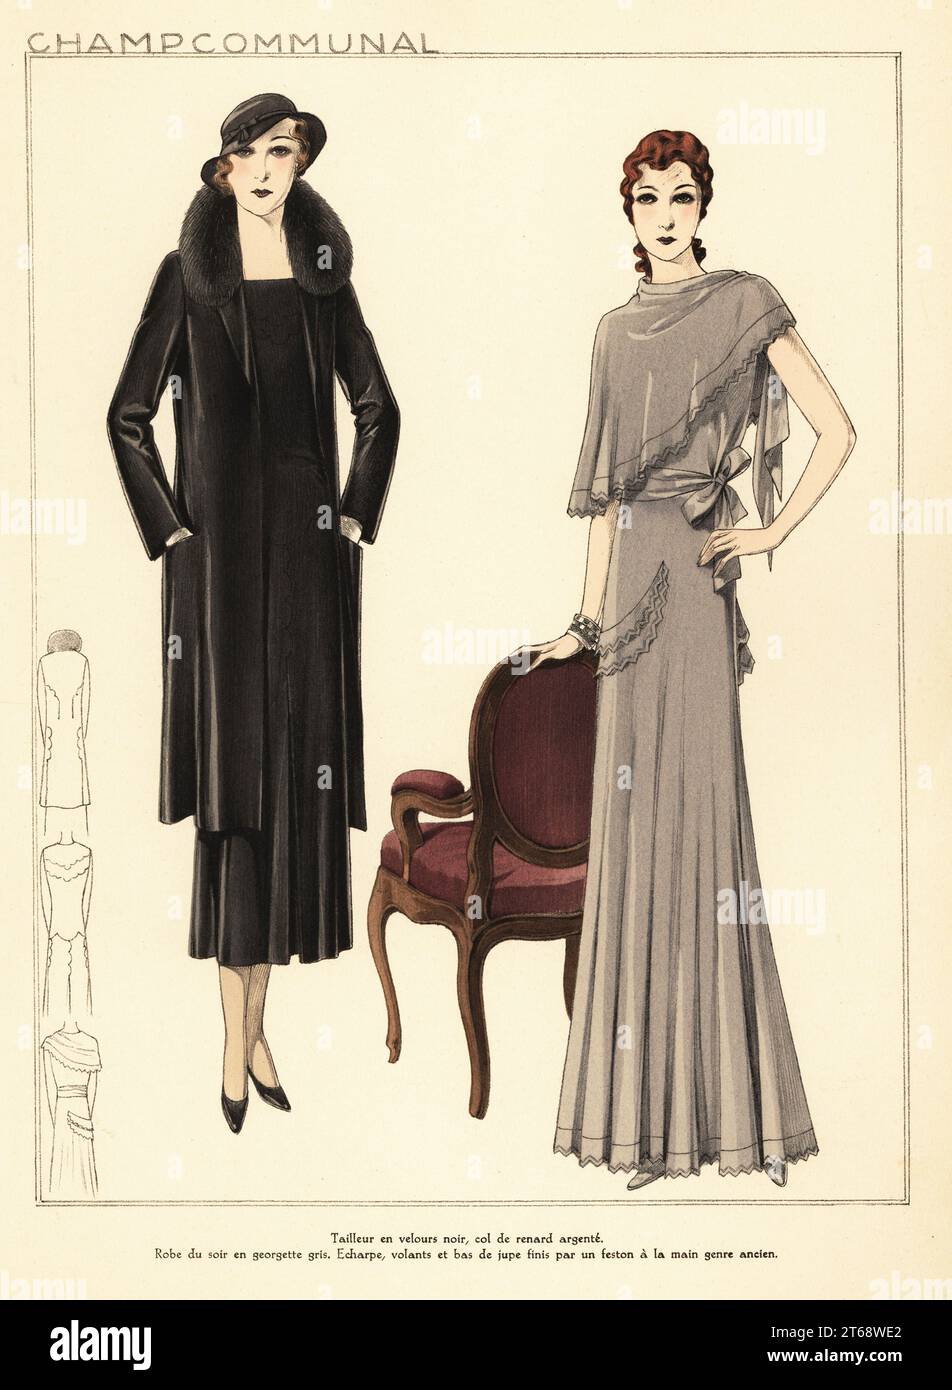 Woman in black velvet suit with silver fox collar. Woman in evening dress in grey georgette. Scarf, ruffles and skirt hem finished in an antique style. Marcel wave bob hairstyles. Fashion designs by Elspeth Champcommunal. Handcoloured pochoir lithograph from La Grande Couture, Creations pour la Femme Mondaine, Atelier Bachwitz, publisher of Chic Parisien, Vienna, September, 1931. Stock Photo